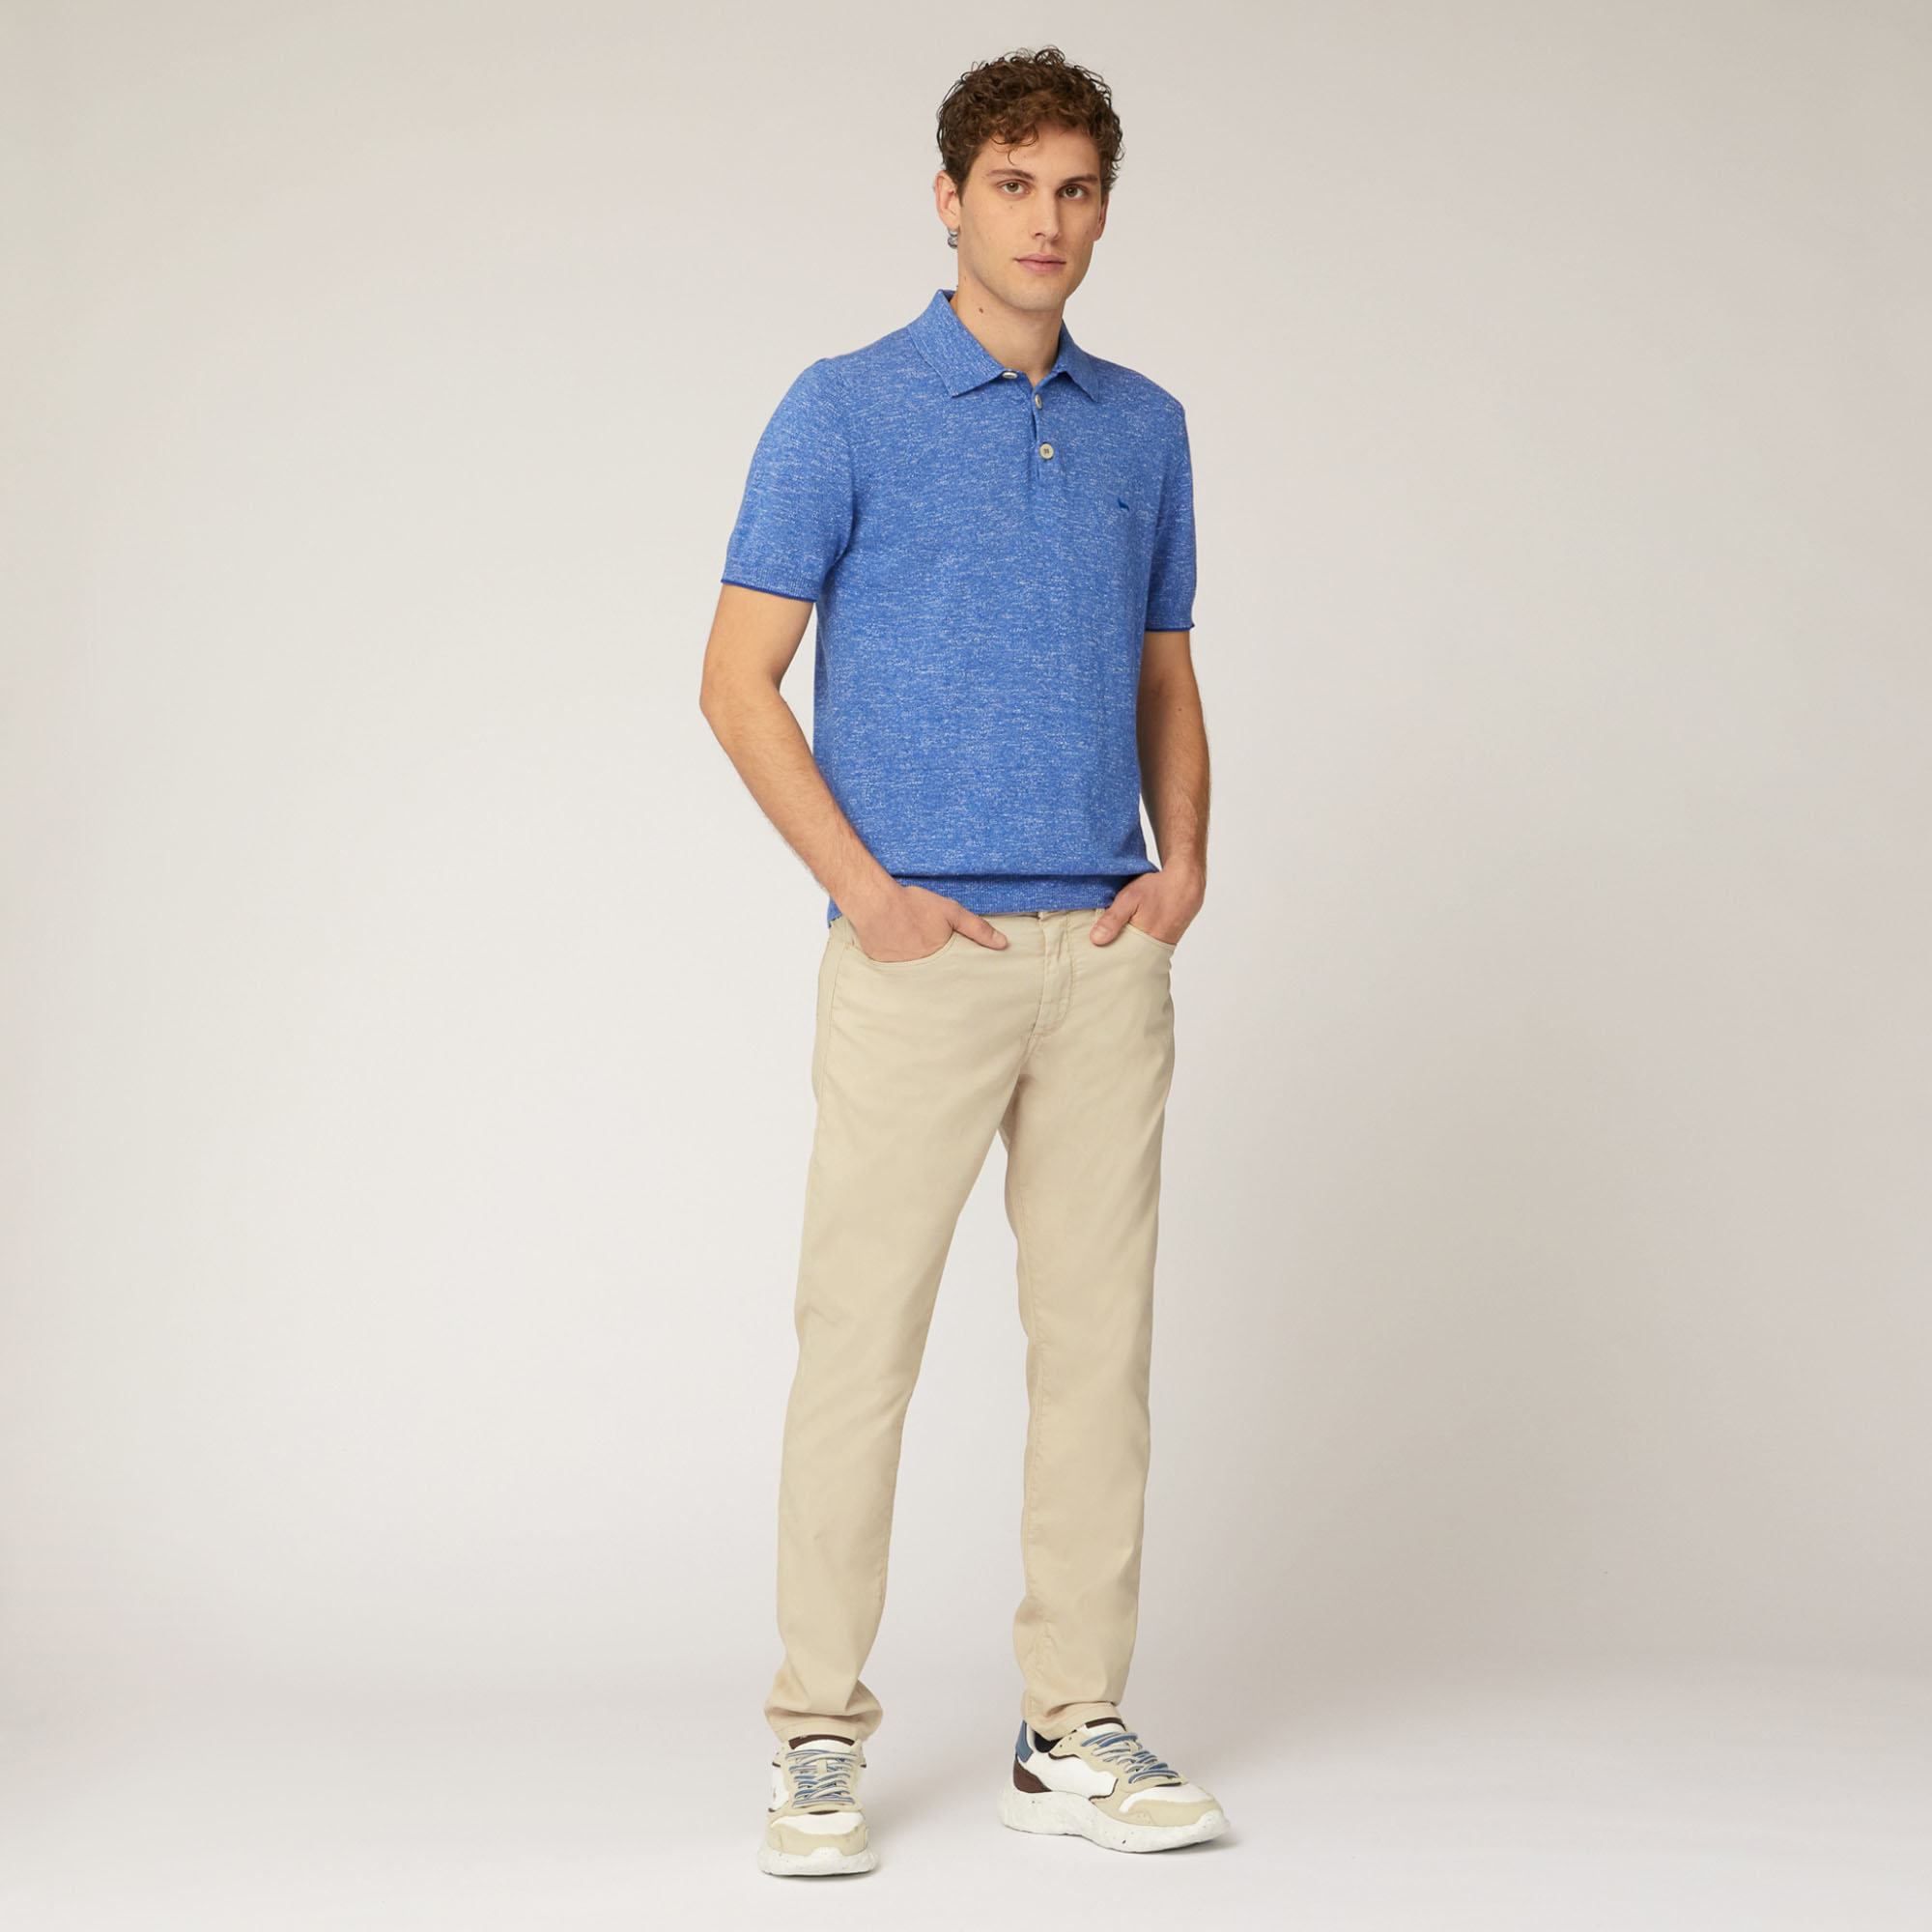 Cotton and Linen Tweed Polo, Light Blue, large image number 3